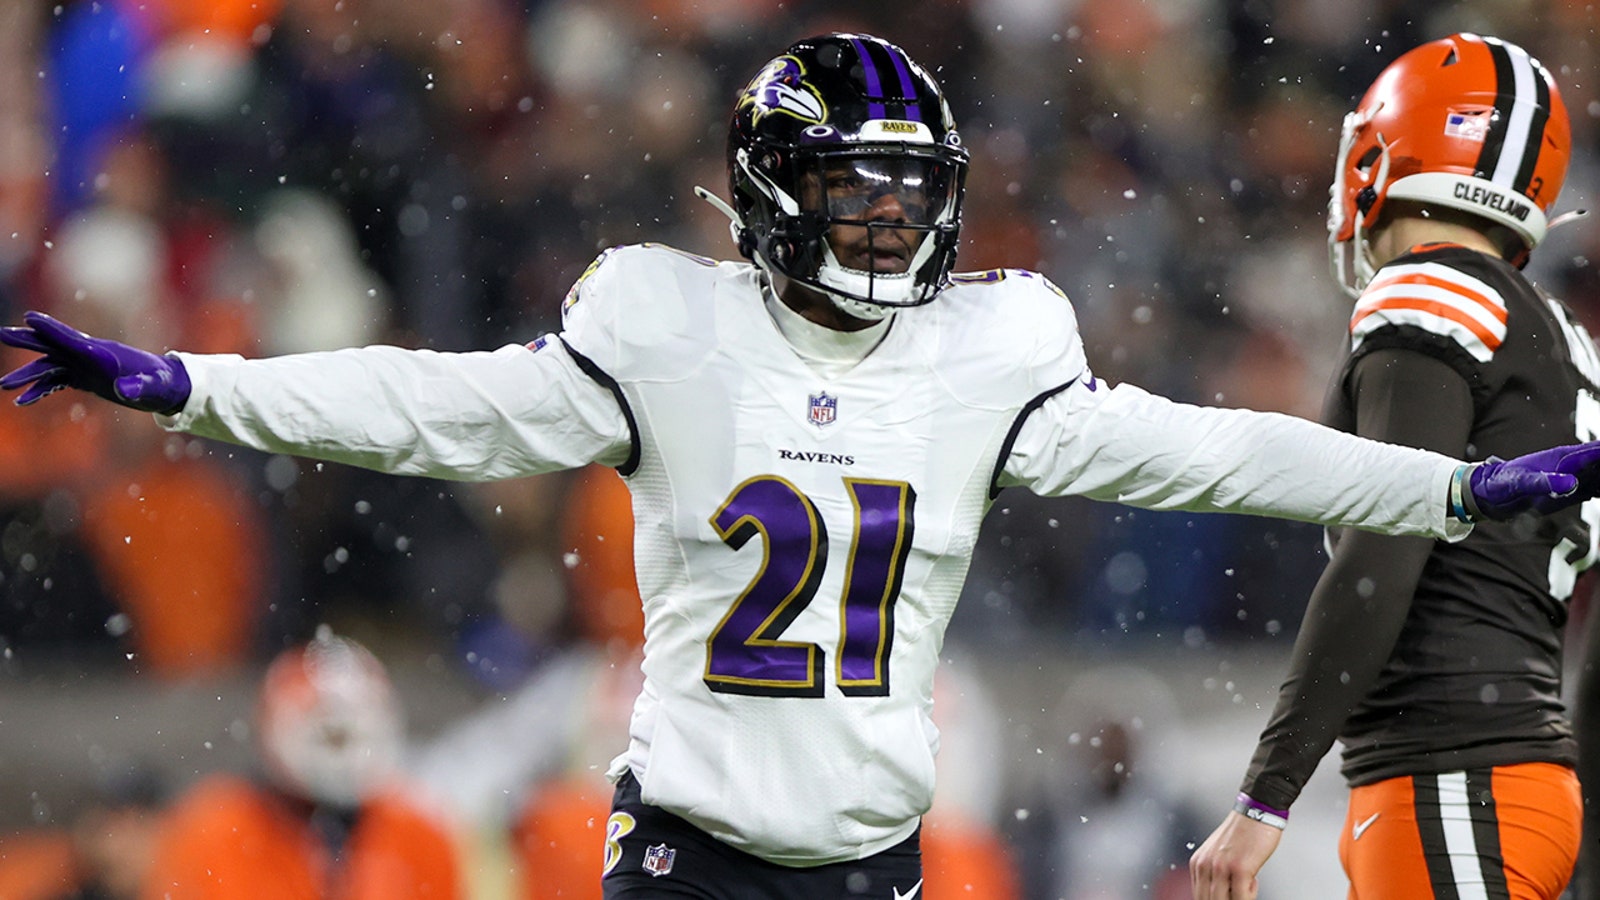 NFL Week 16: Should you take the Ravens this weekend against the Falcons?